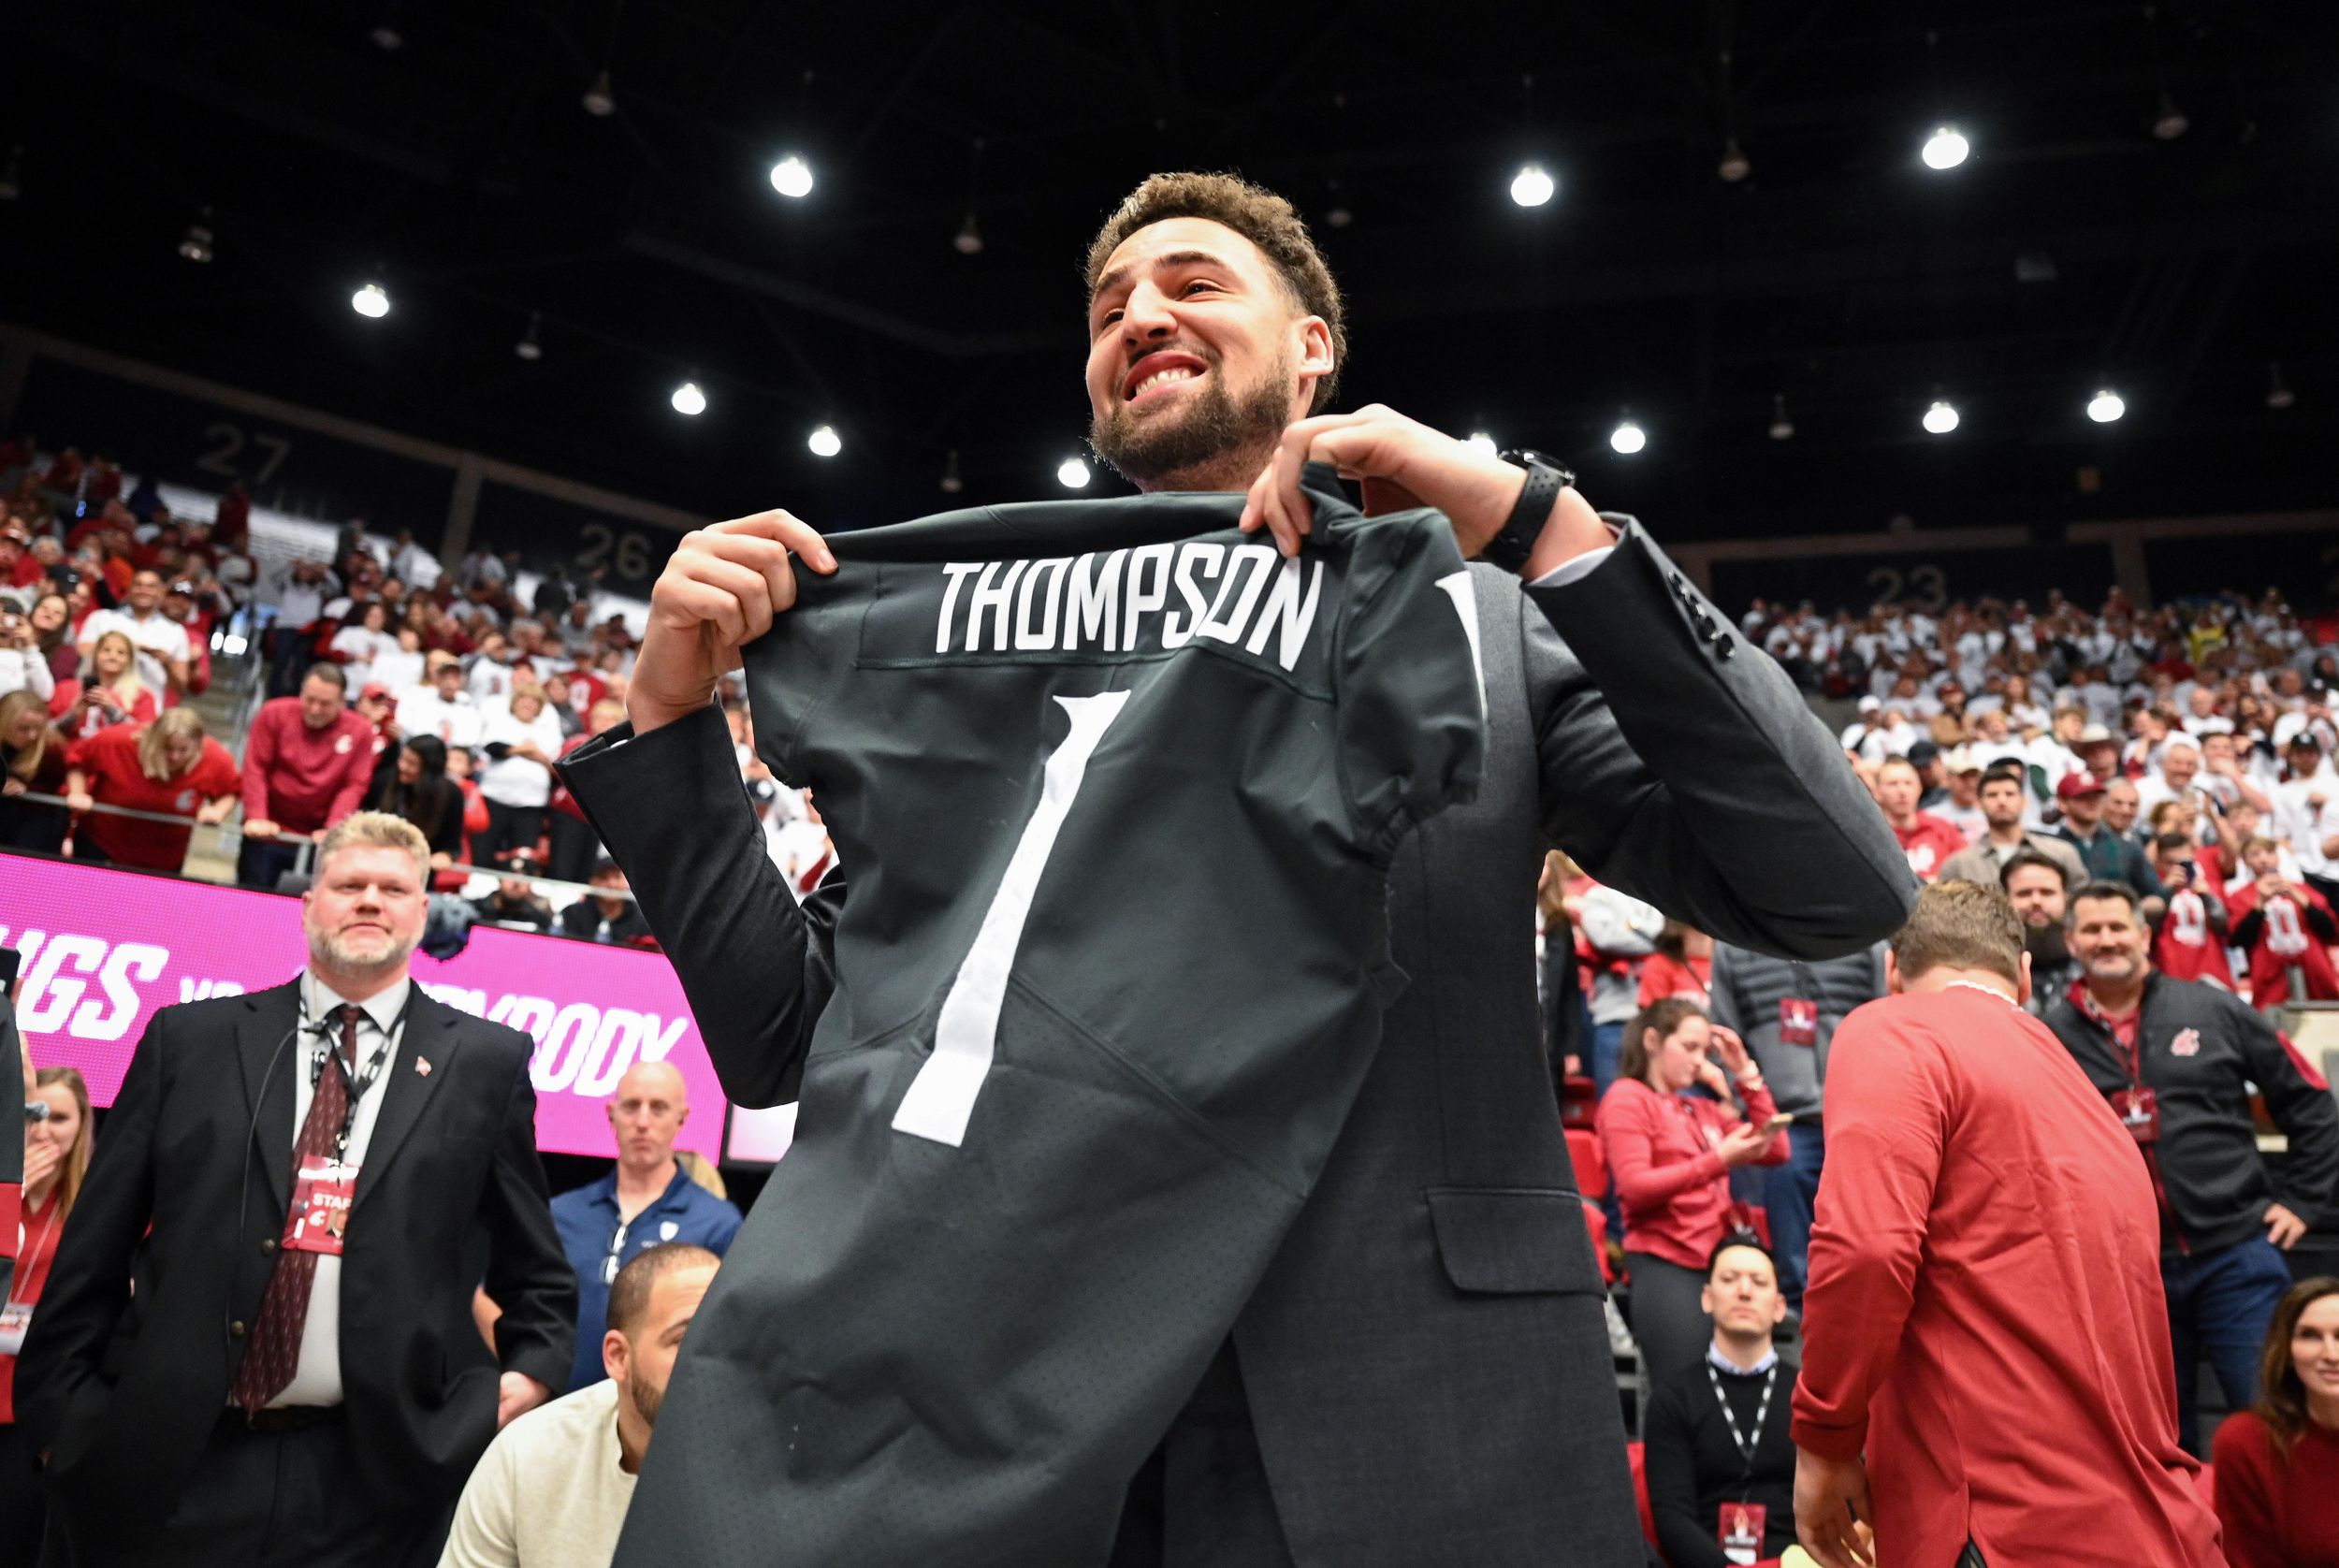 How to watch Klay Thompson's jersey retirement at WSU - CougCenter